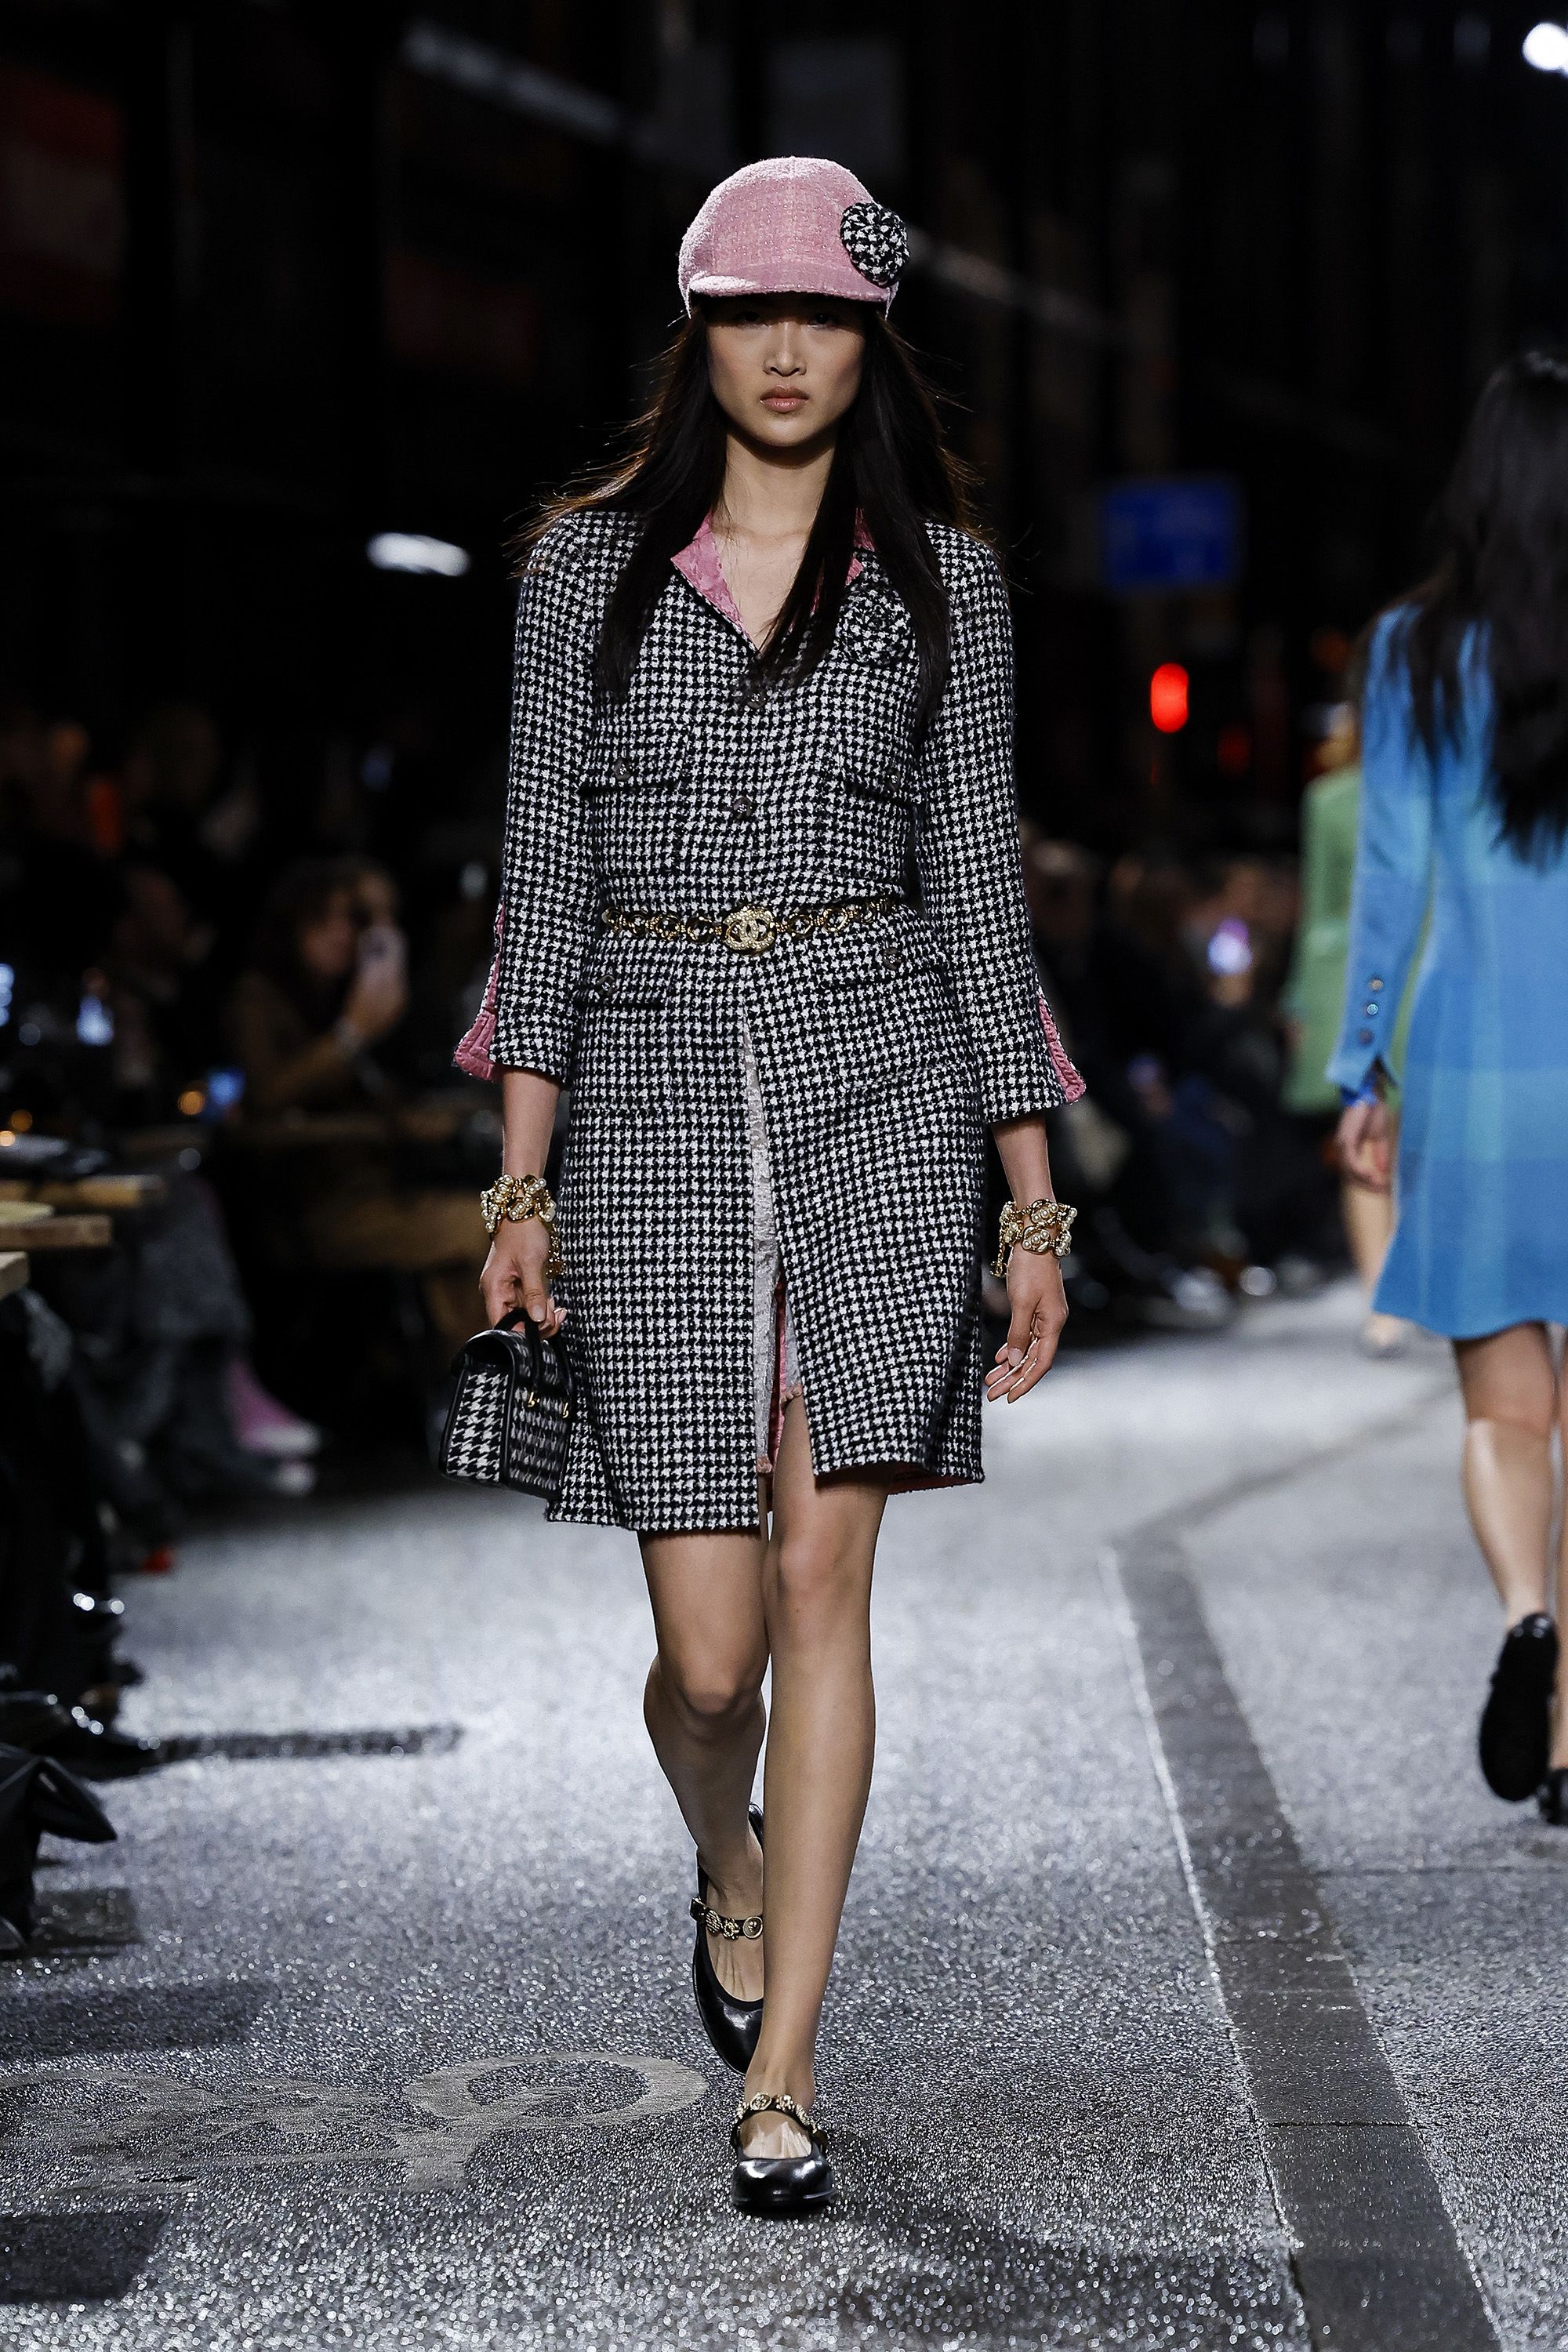 Houndstooth coats were cinched at the waist with gold Chanel belts.